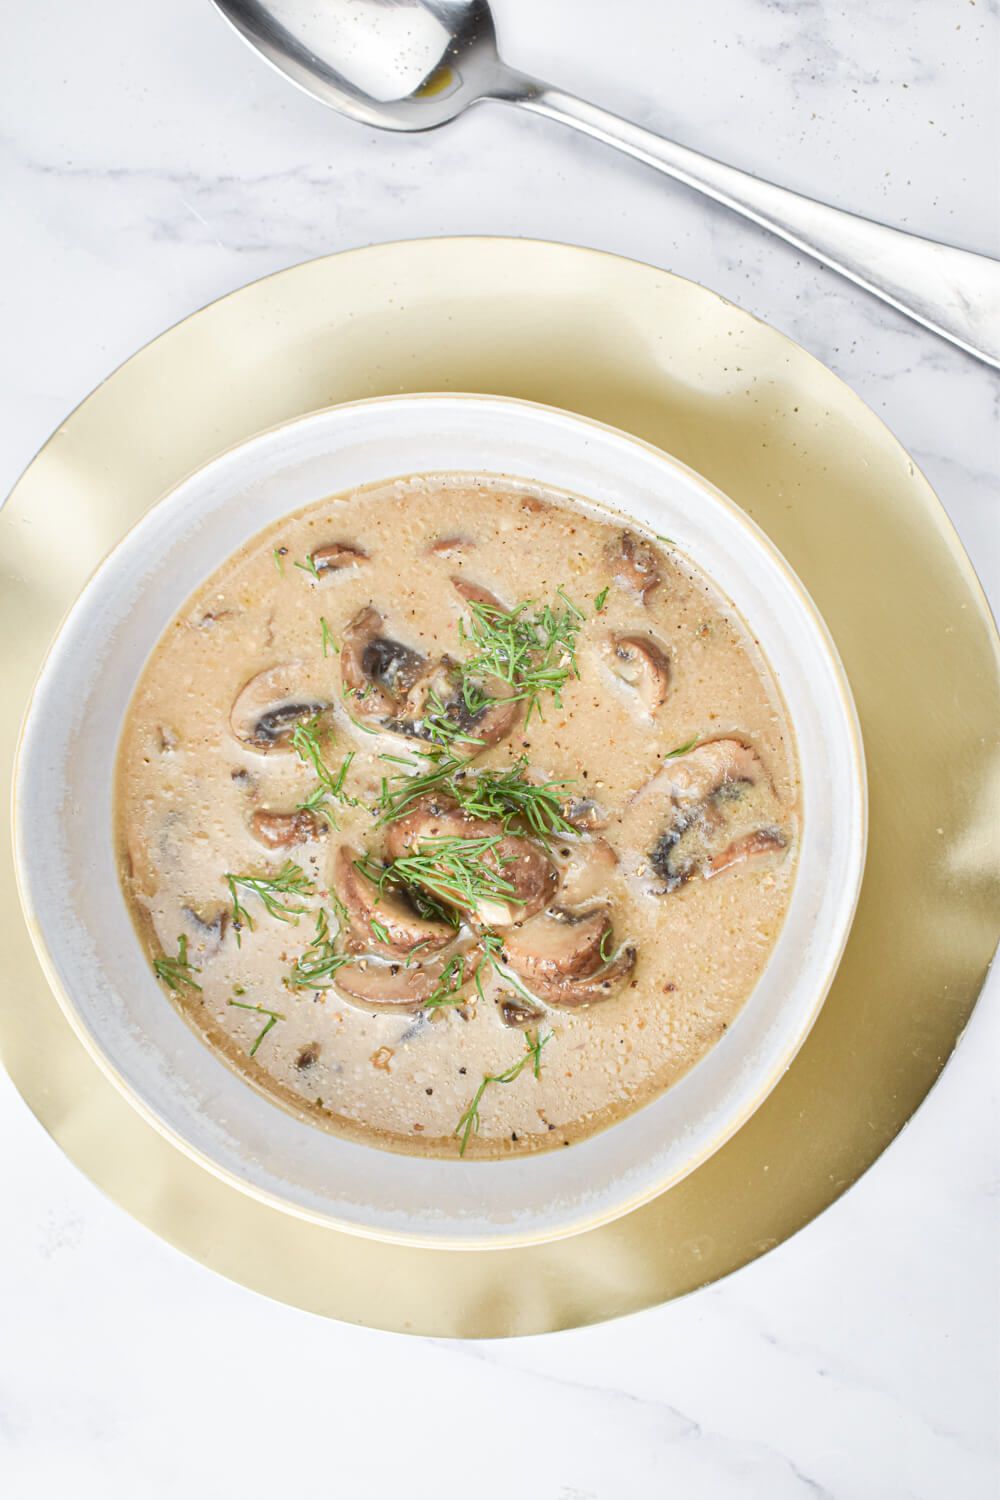 Mushroom soup with fresh mushroom, thyme, and a creamy broth in a bowl with a spoon.